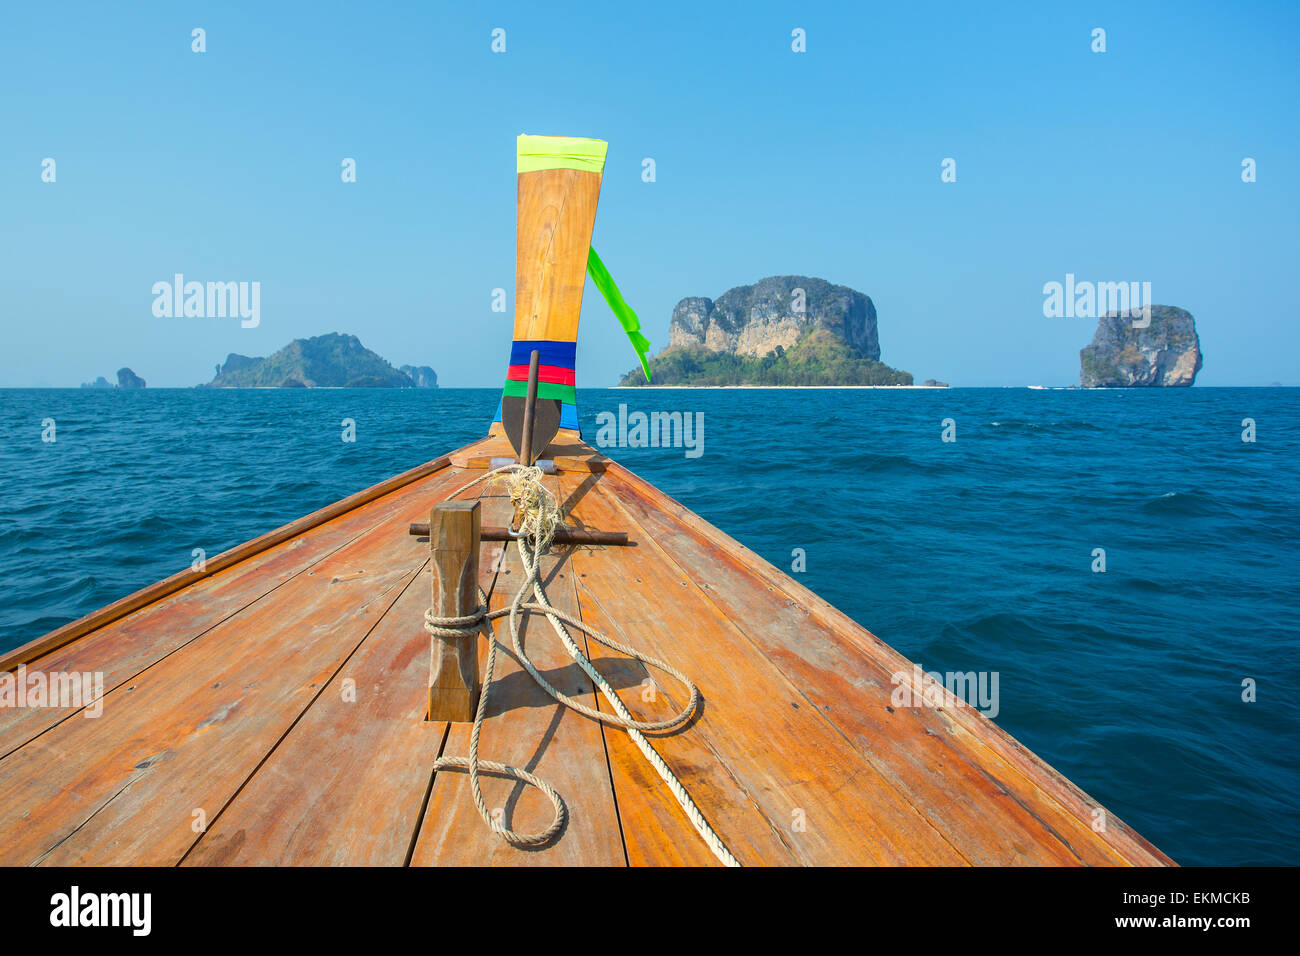 Longtail boat at the tropical beach in Andaman sea, Thailand Stock Photo